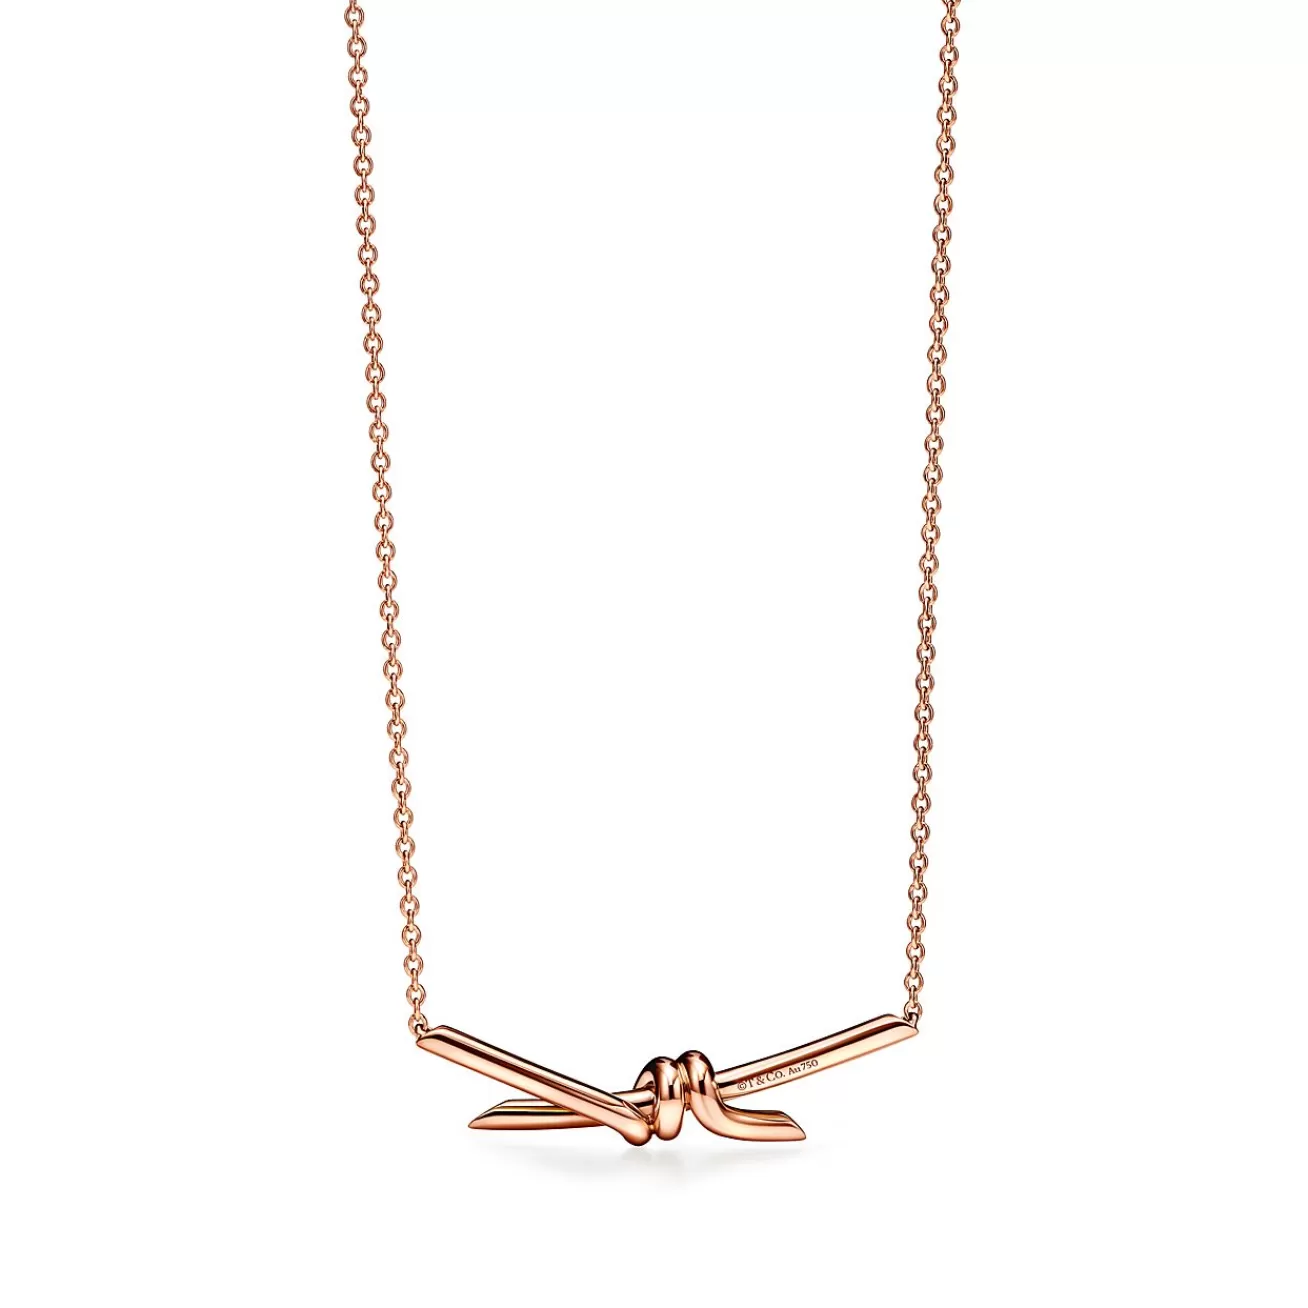 Tiffany & Co. Tiffany Knot Pendant in Rose Gold | ^ Necklaces & Pendants | Rose Gold Jewelry